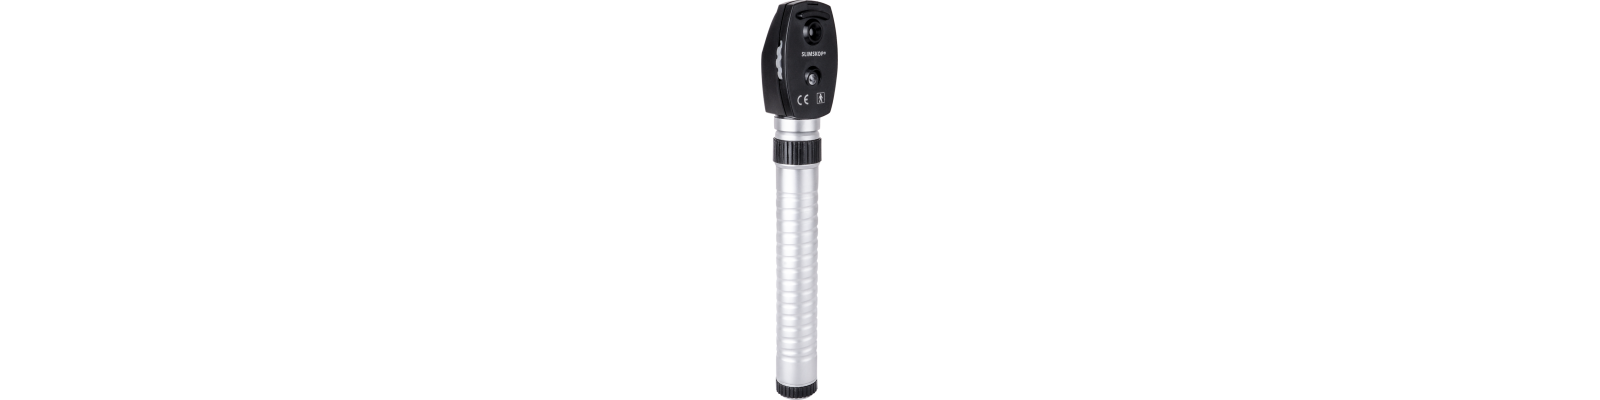 SLIMSKOP® | OPHTHALMOSCOPE